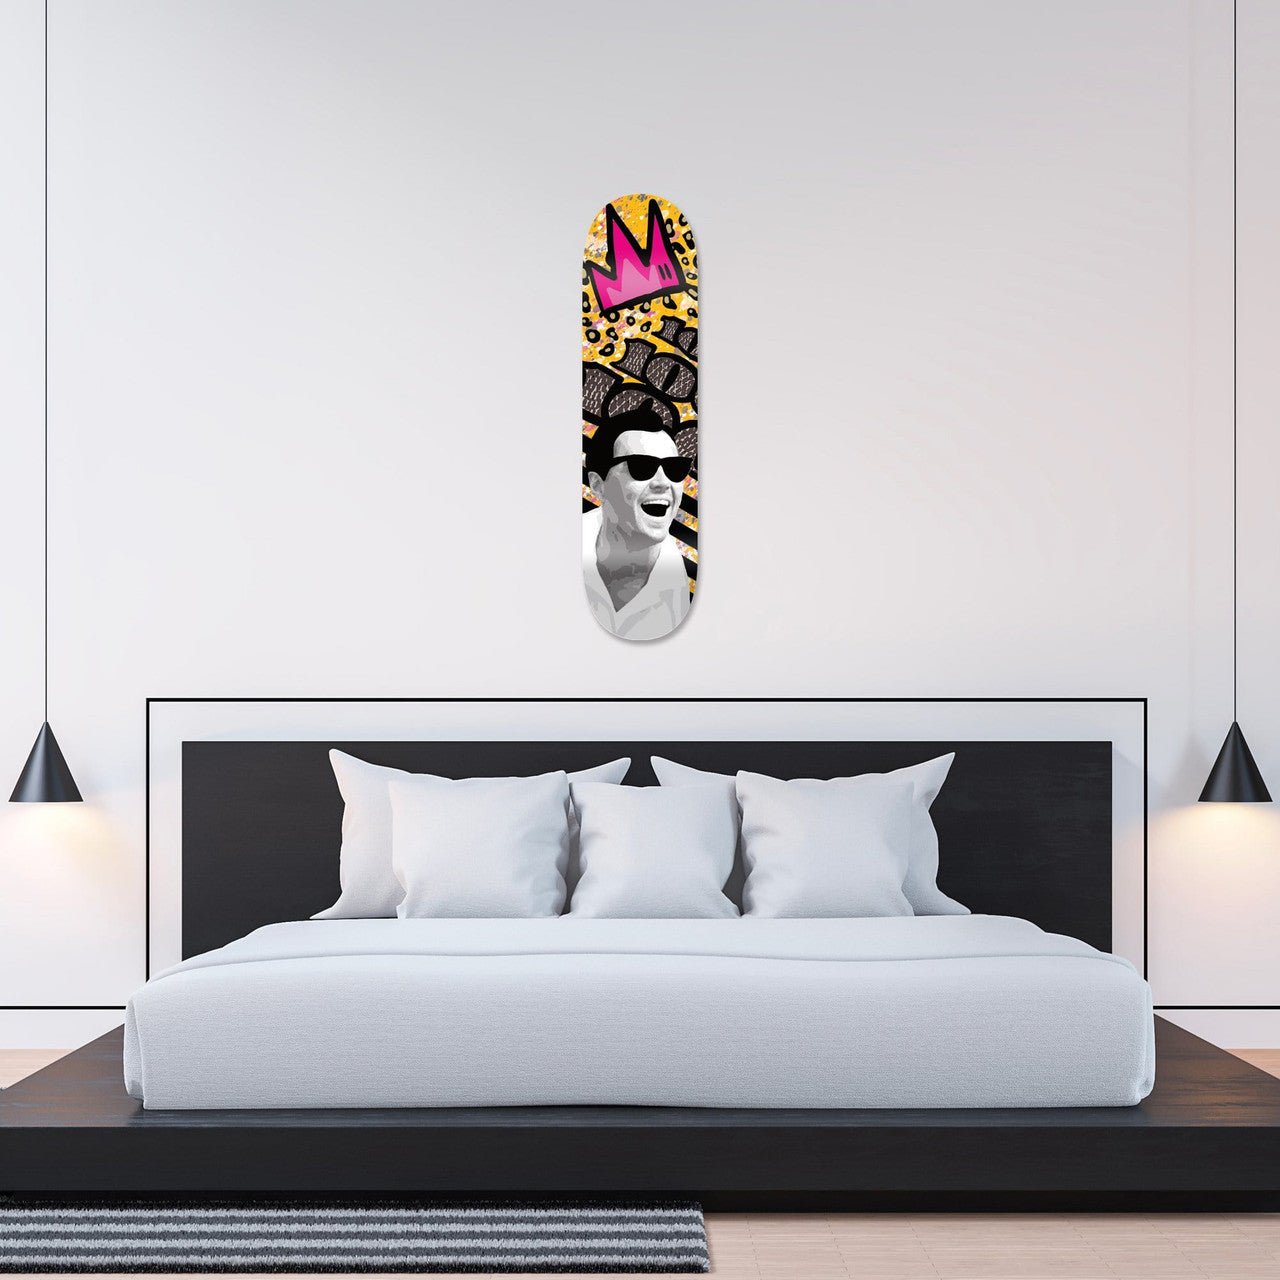 "The Wolf: Who's the Boss?" - Skateboard - The Art Lab Acrylic Glass Art - Skateboards, Surfboards & Glass Prints Wall Decor for your Home.